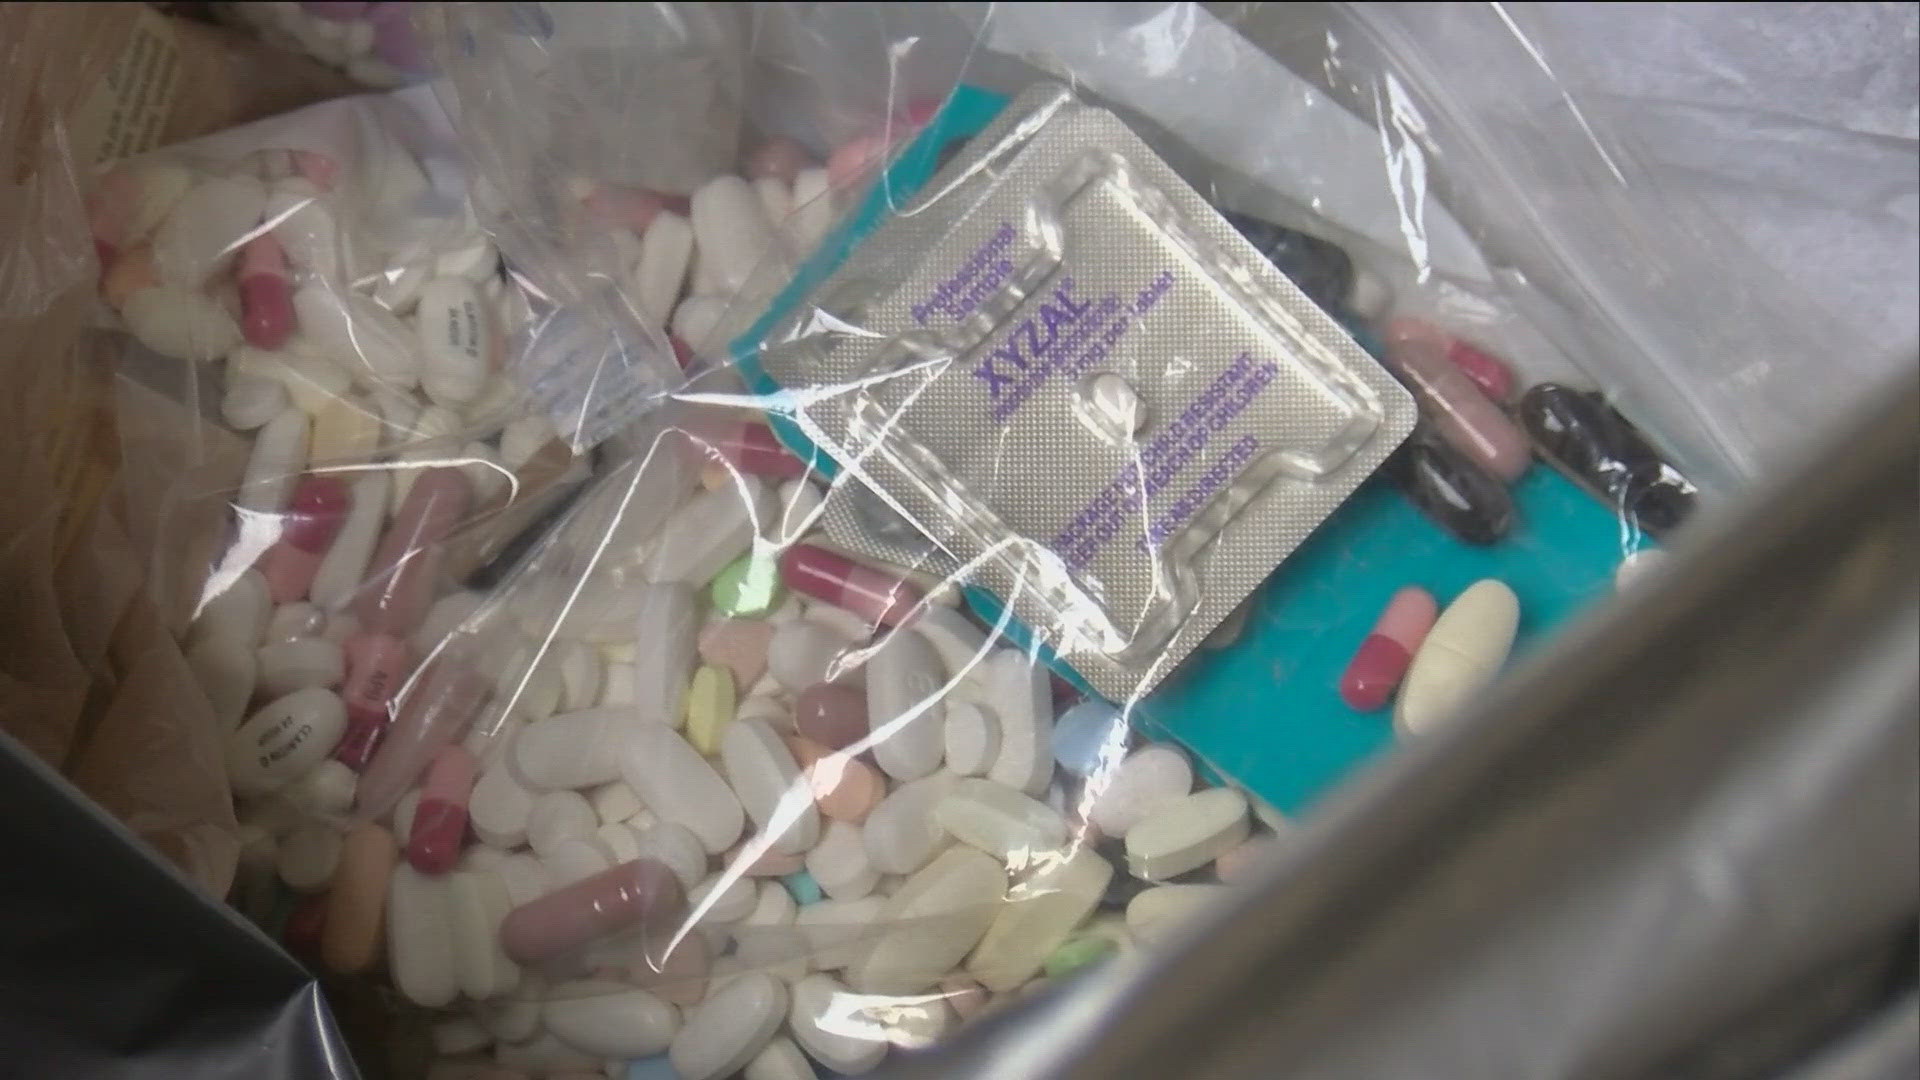 Thousands of unused drugs are now off the shelves of people’s medicine cabinets and are safely disposed of throughout northwest Ohio as part of Drug Take Back Day.